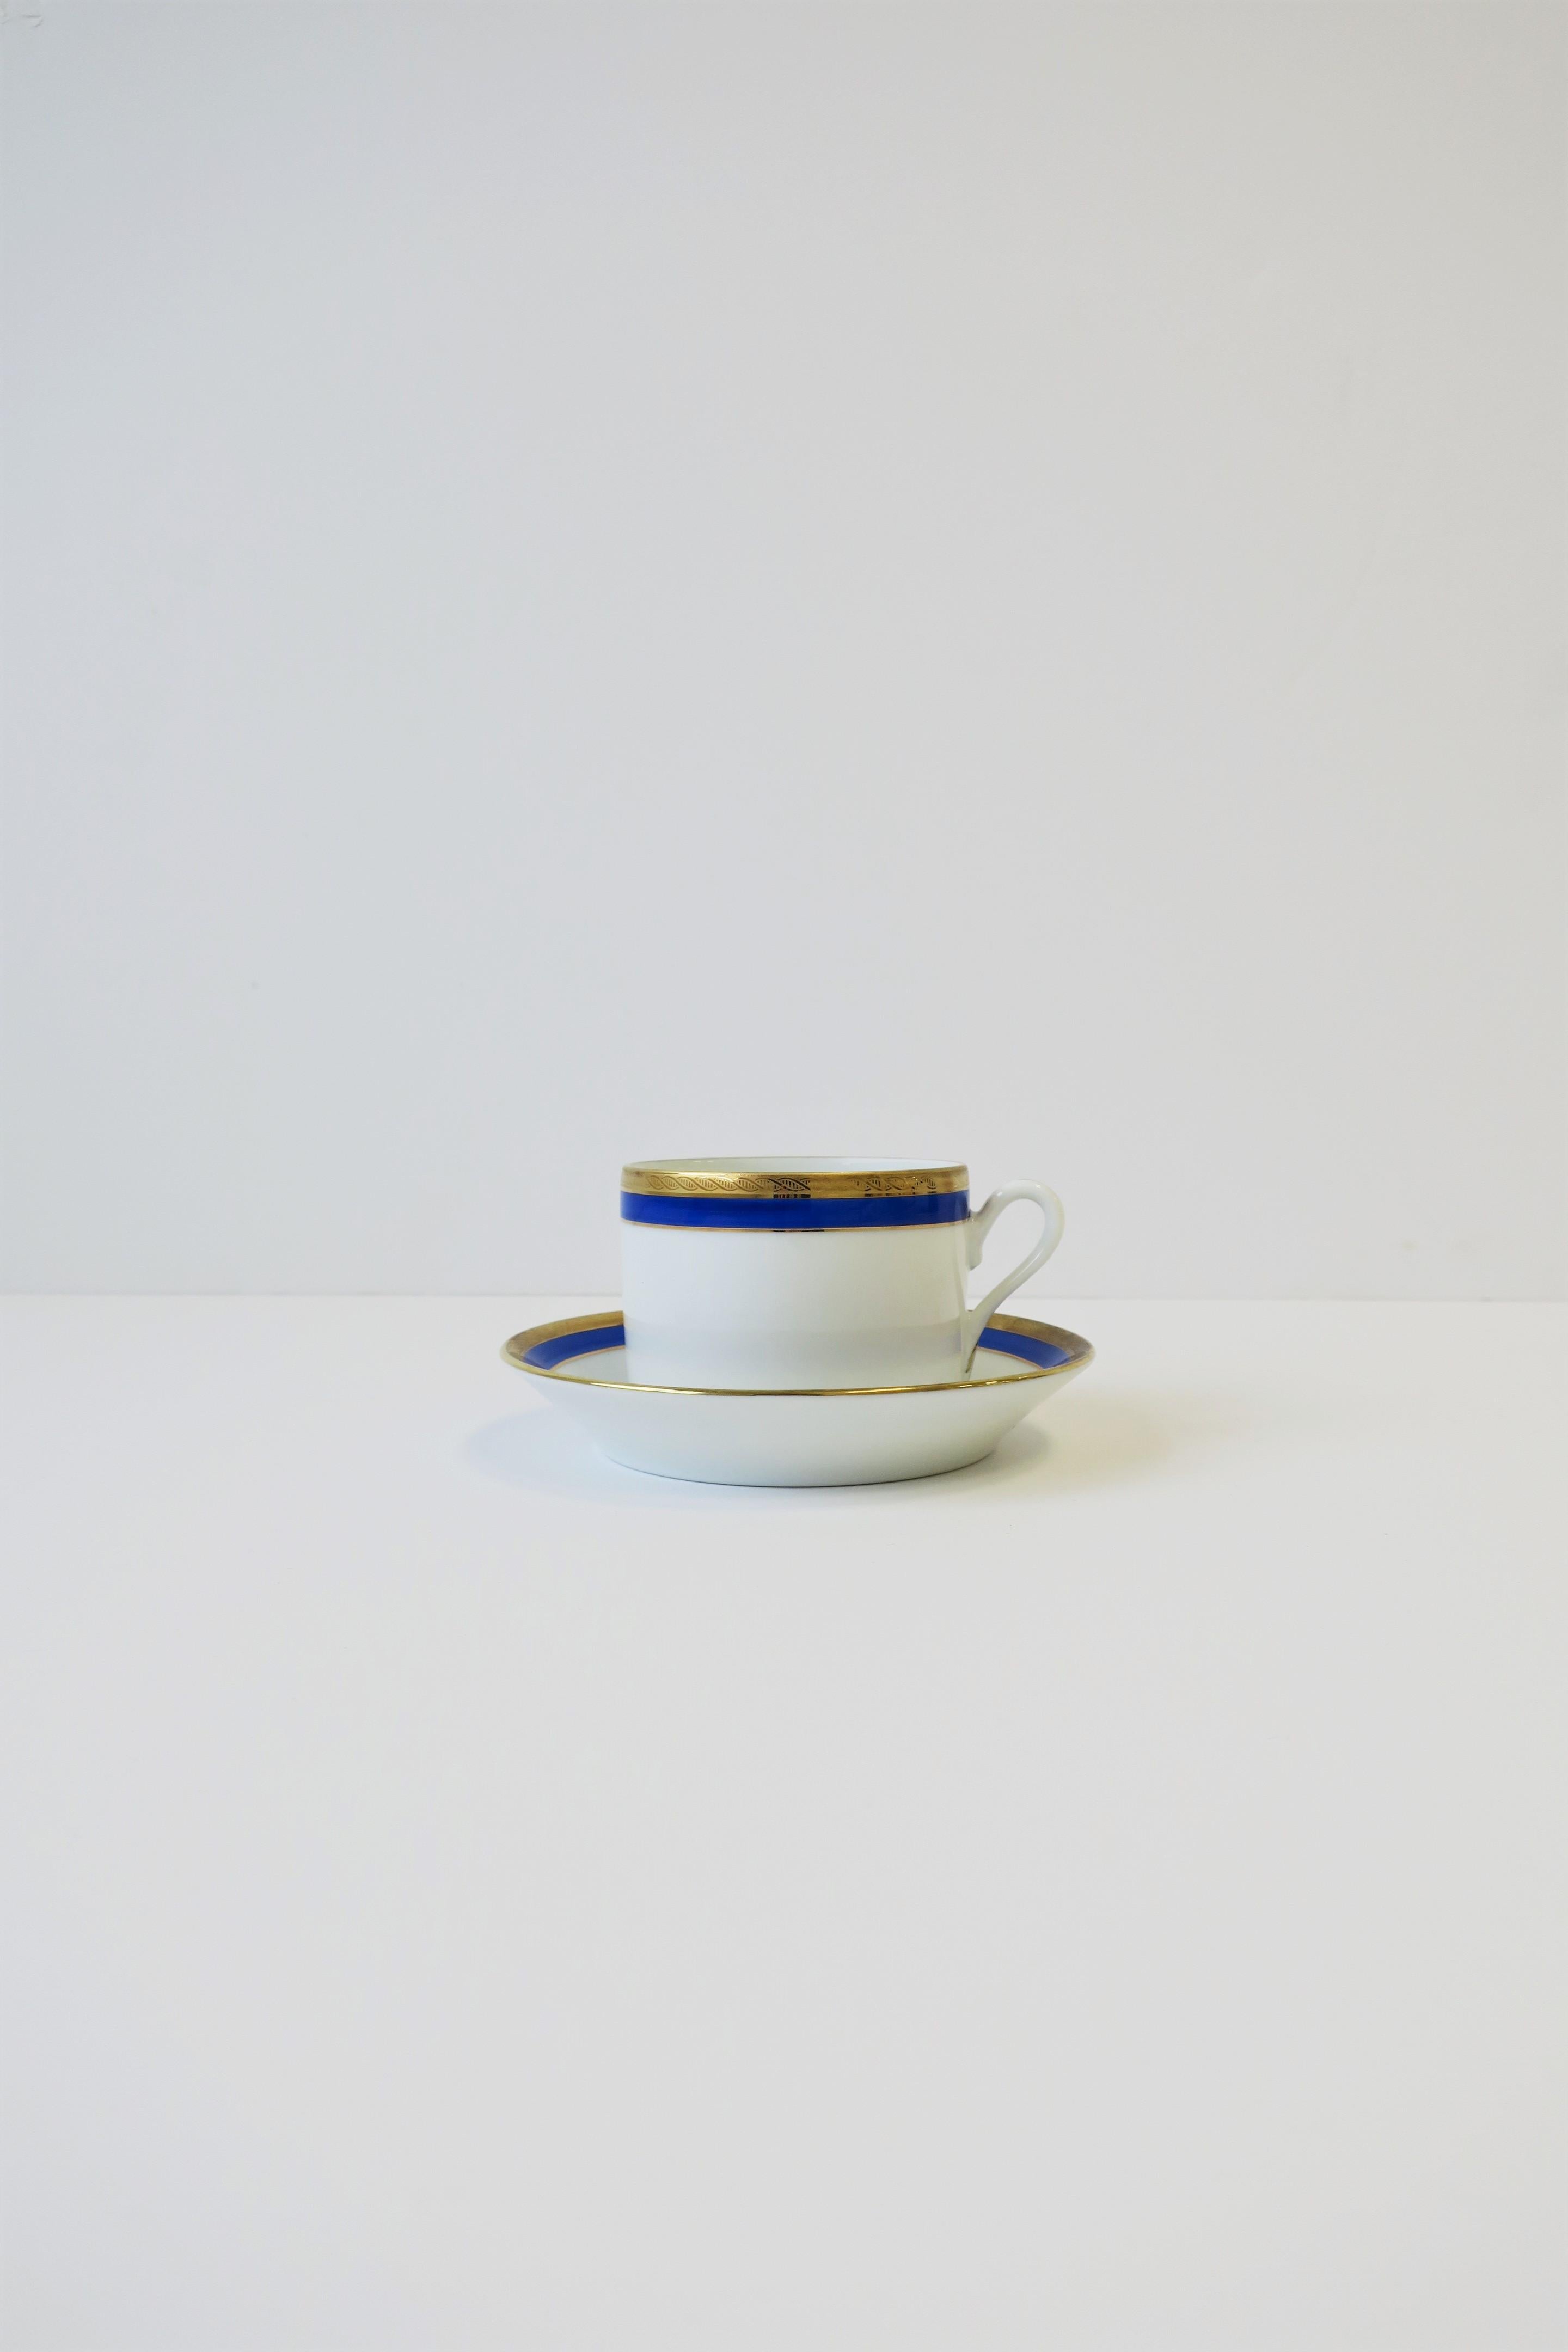 A very beautiful mid-20th century Italian white porcelain, cobalt blue and gold gilt, coffee or tea cup and saucer by designer Richard Ginori, Italy. Colors include, cobalt blue, gold and white porcelain. With maker's mark on bottom as show in image